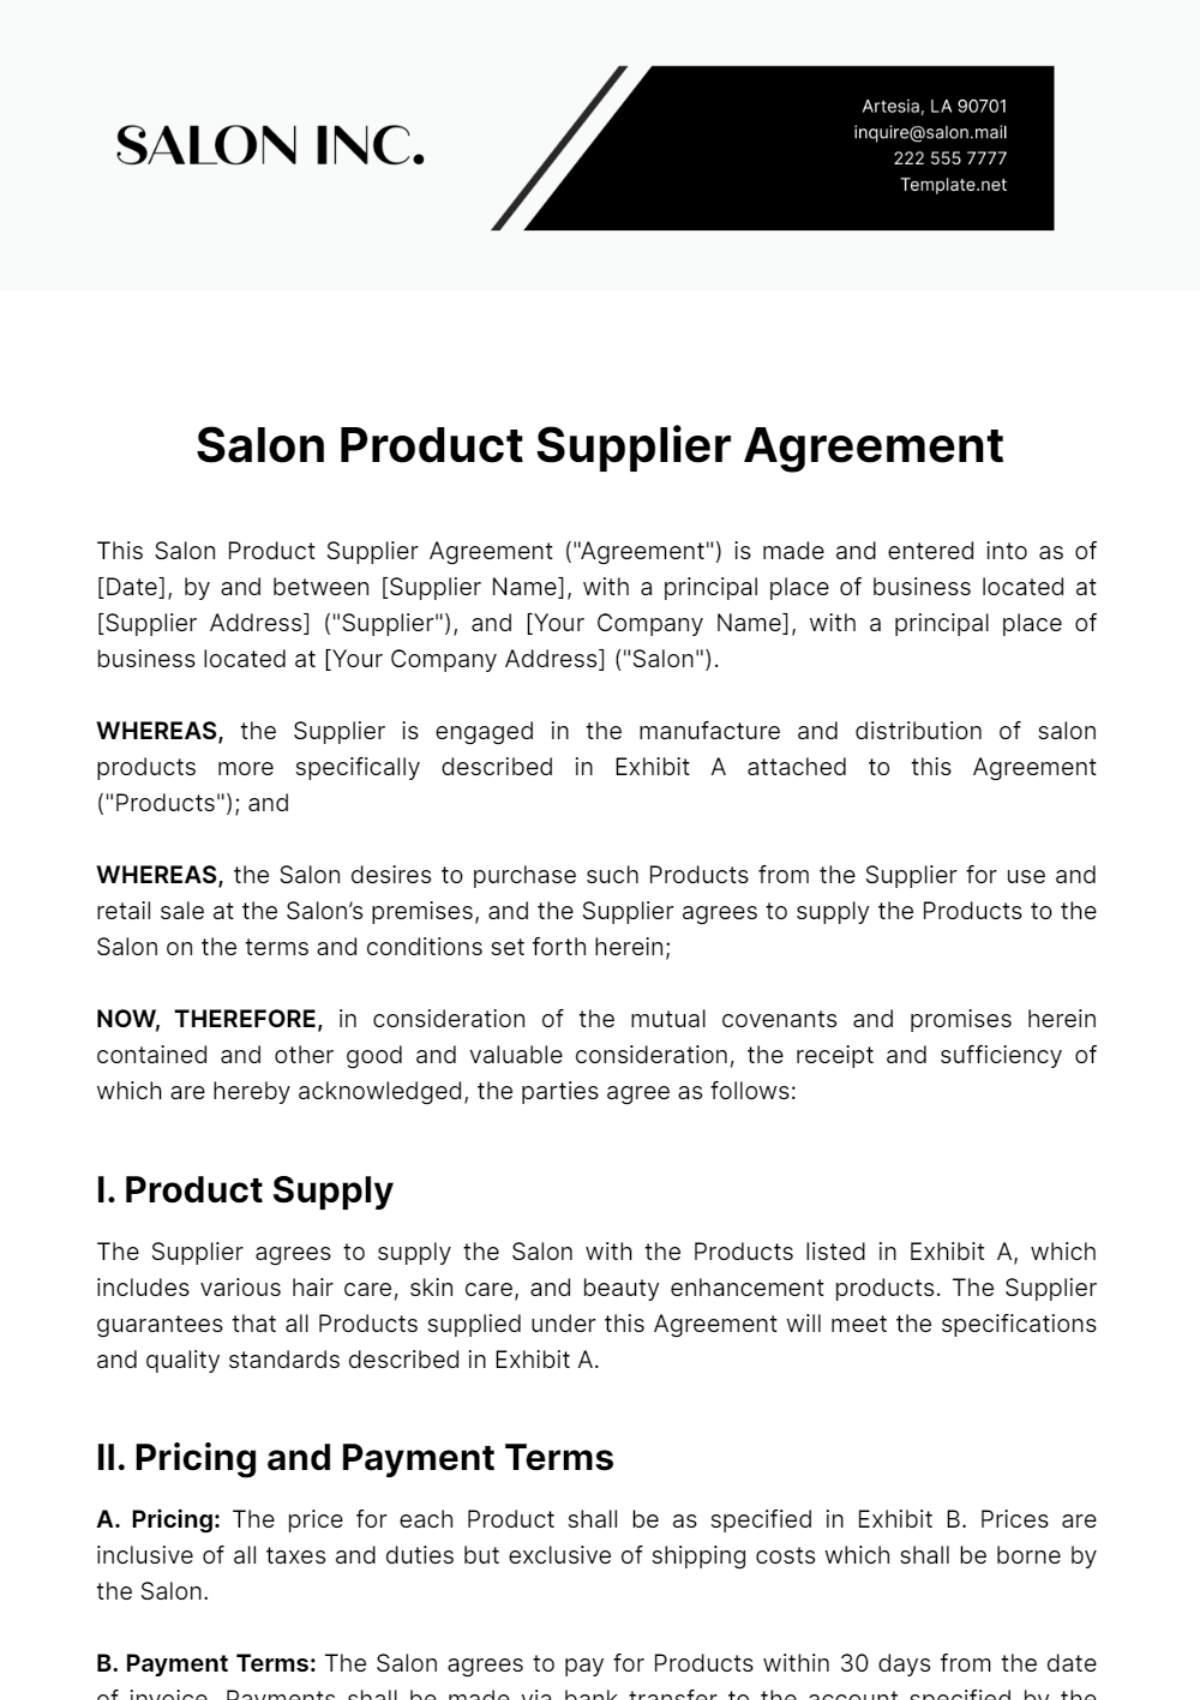 Salon Product Supplier Agreement Template